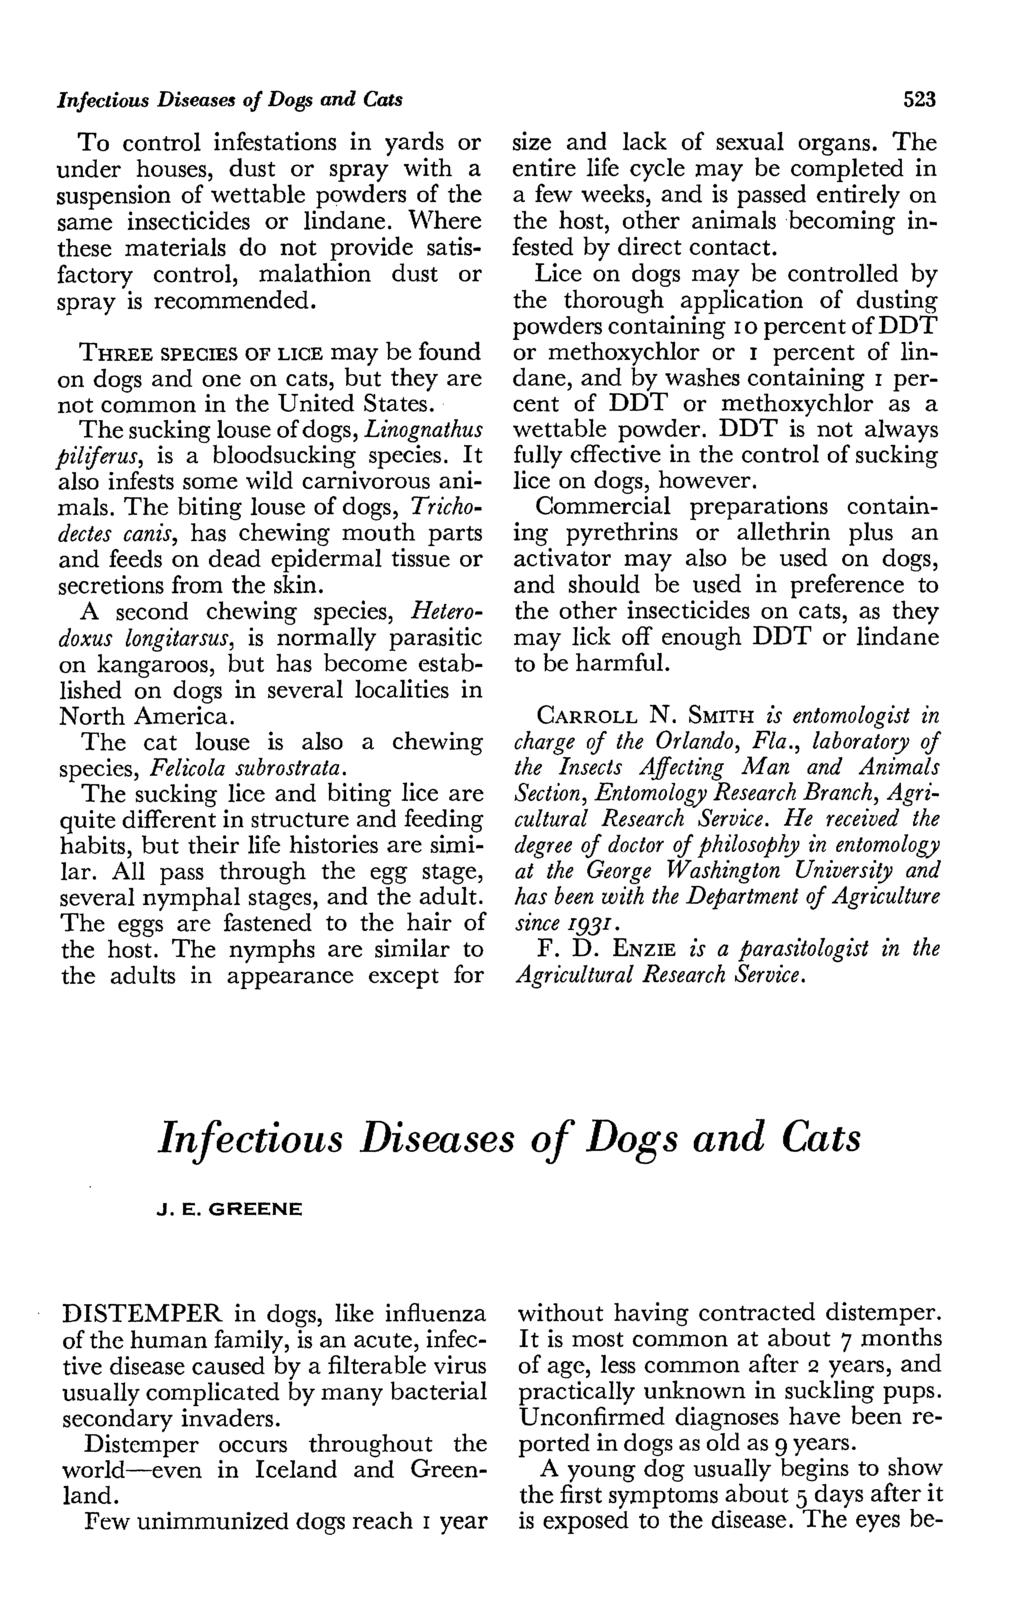 Infectious Diseases of Dogs and Cats To control infestations in yards or under houses, dust or spray with a suspension of wettable powders of the same insecticides or lindane.